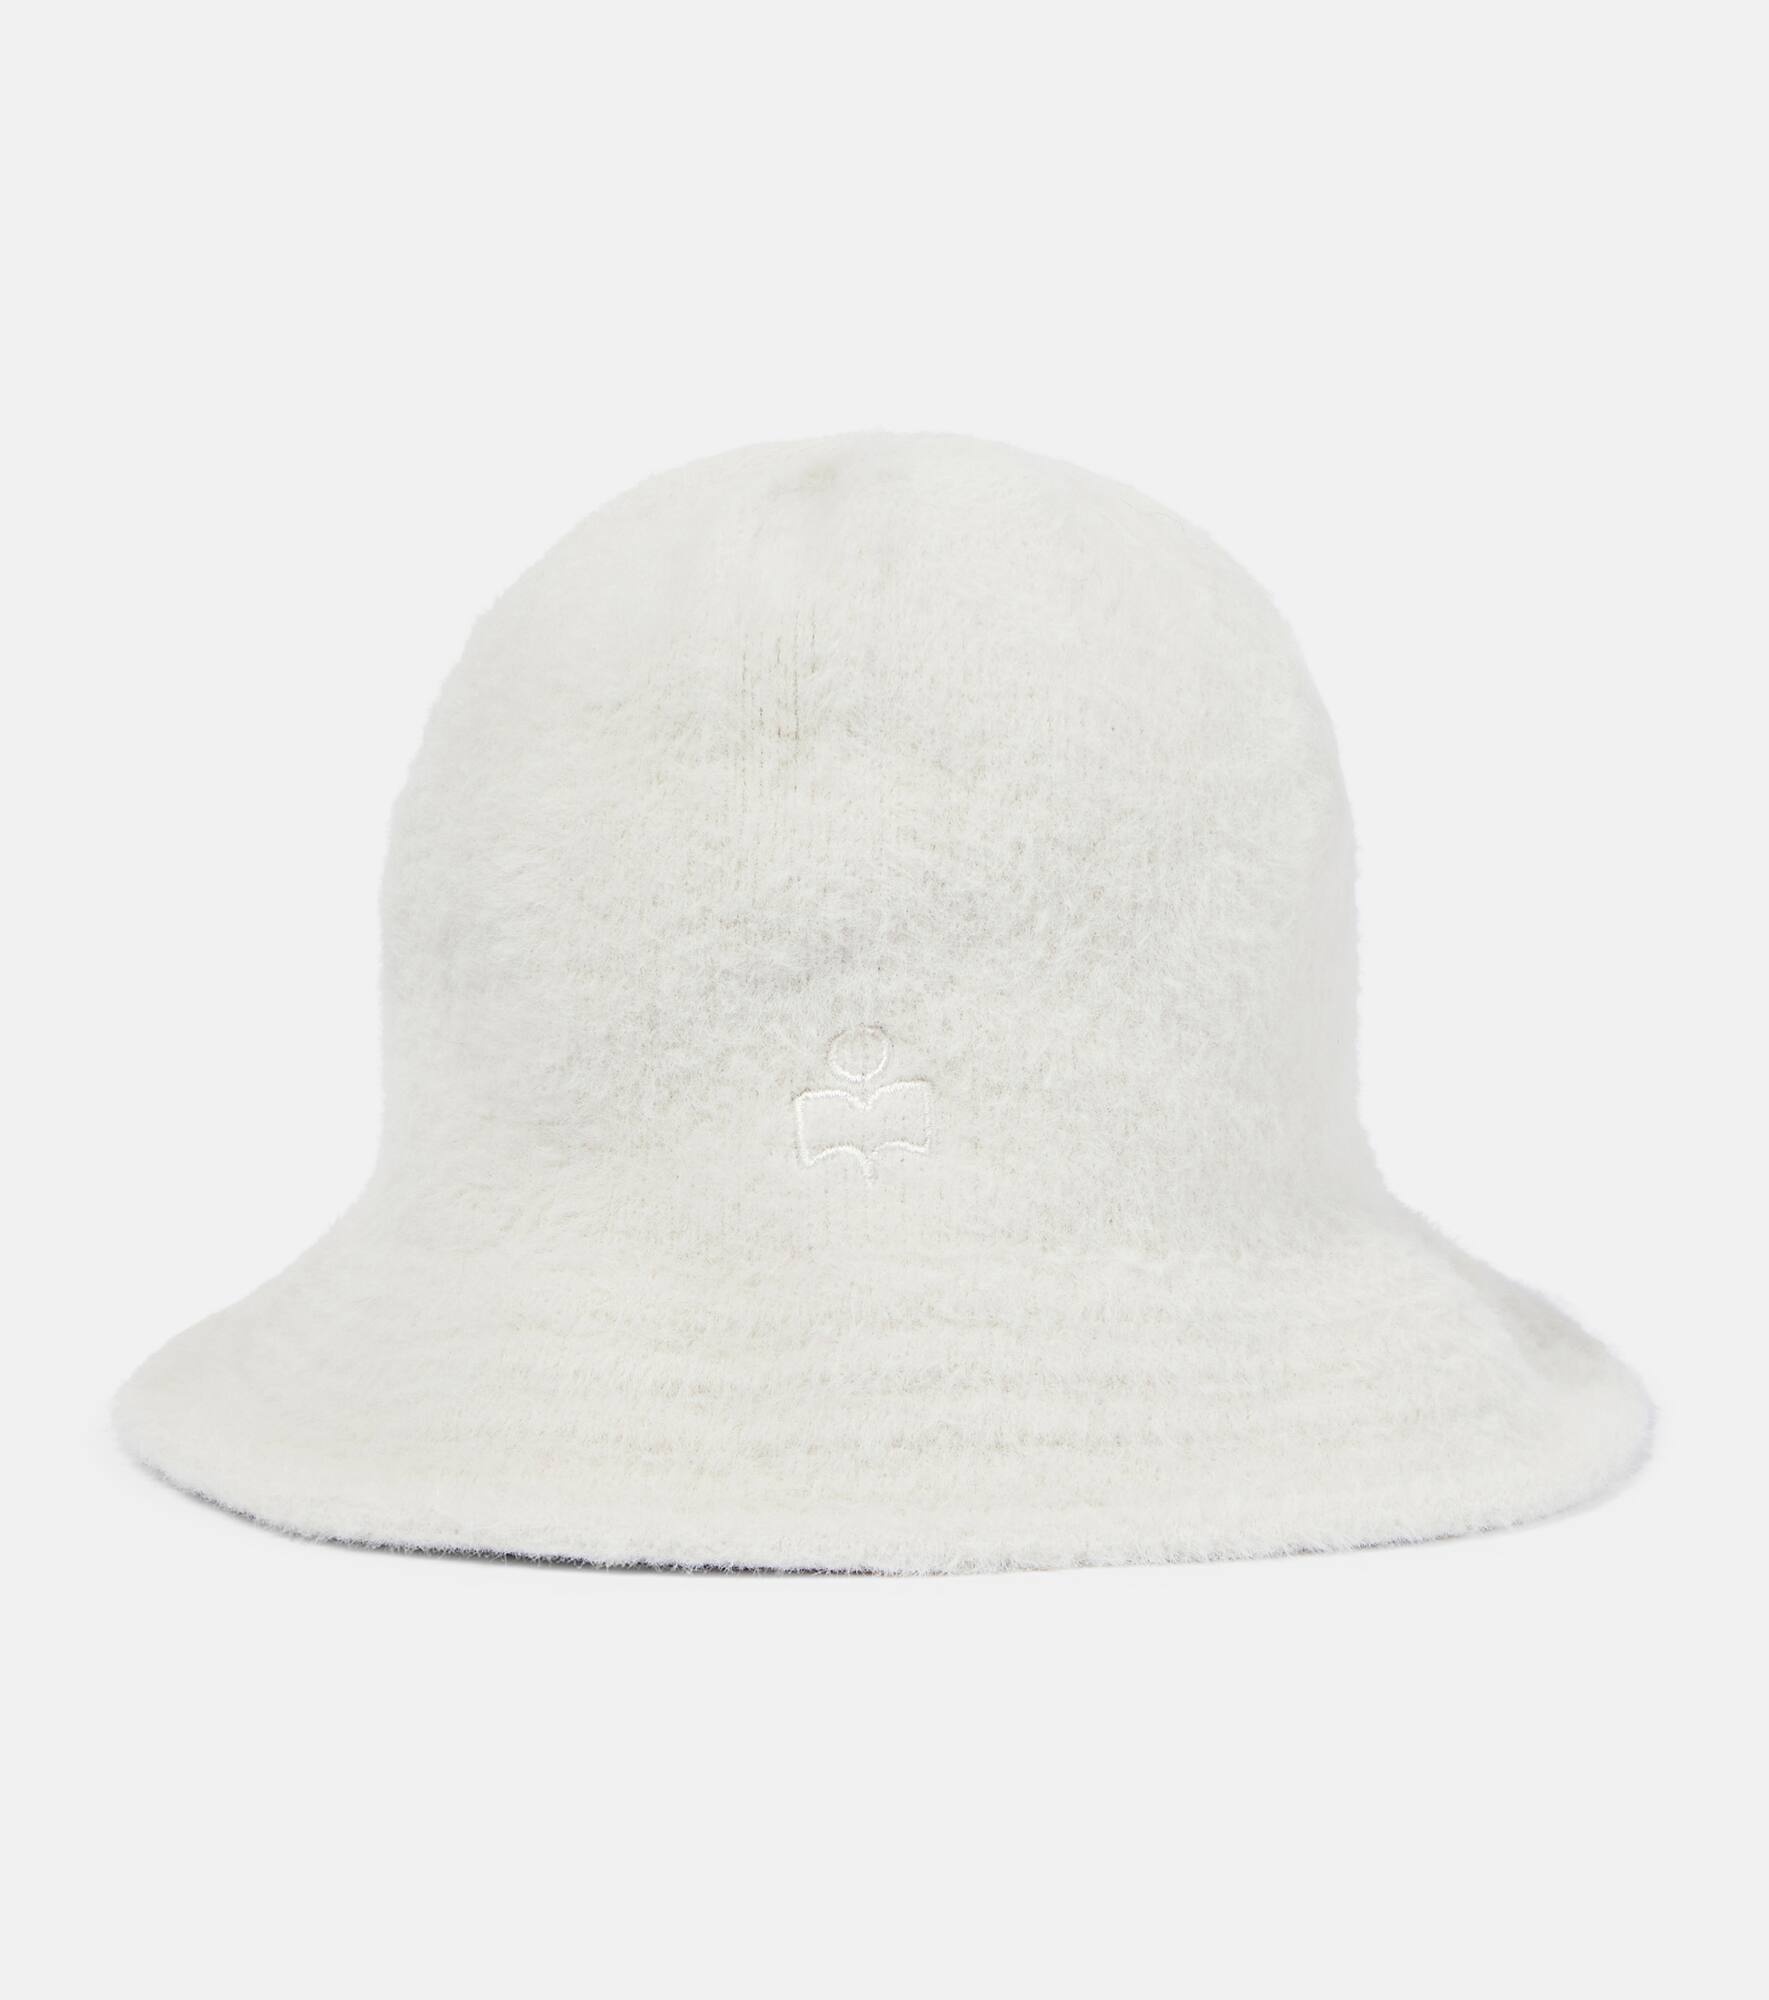 Holmy embroidered bucket hat - 1